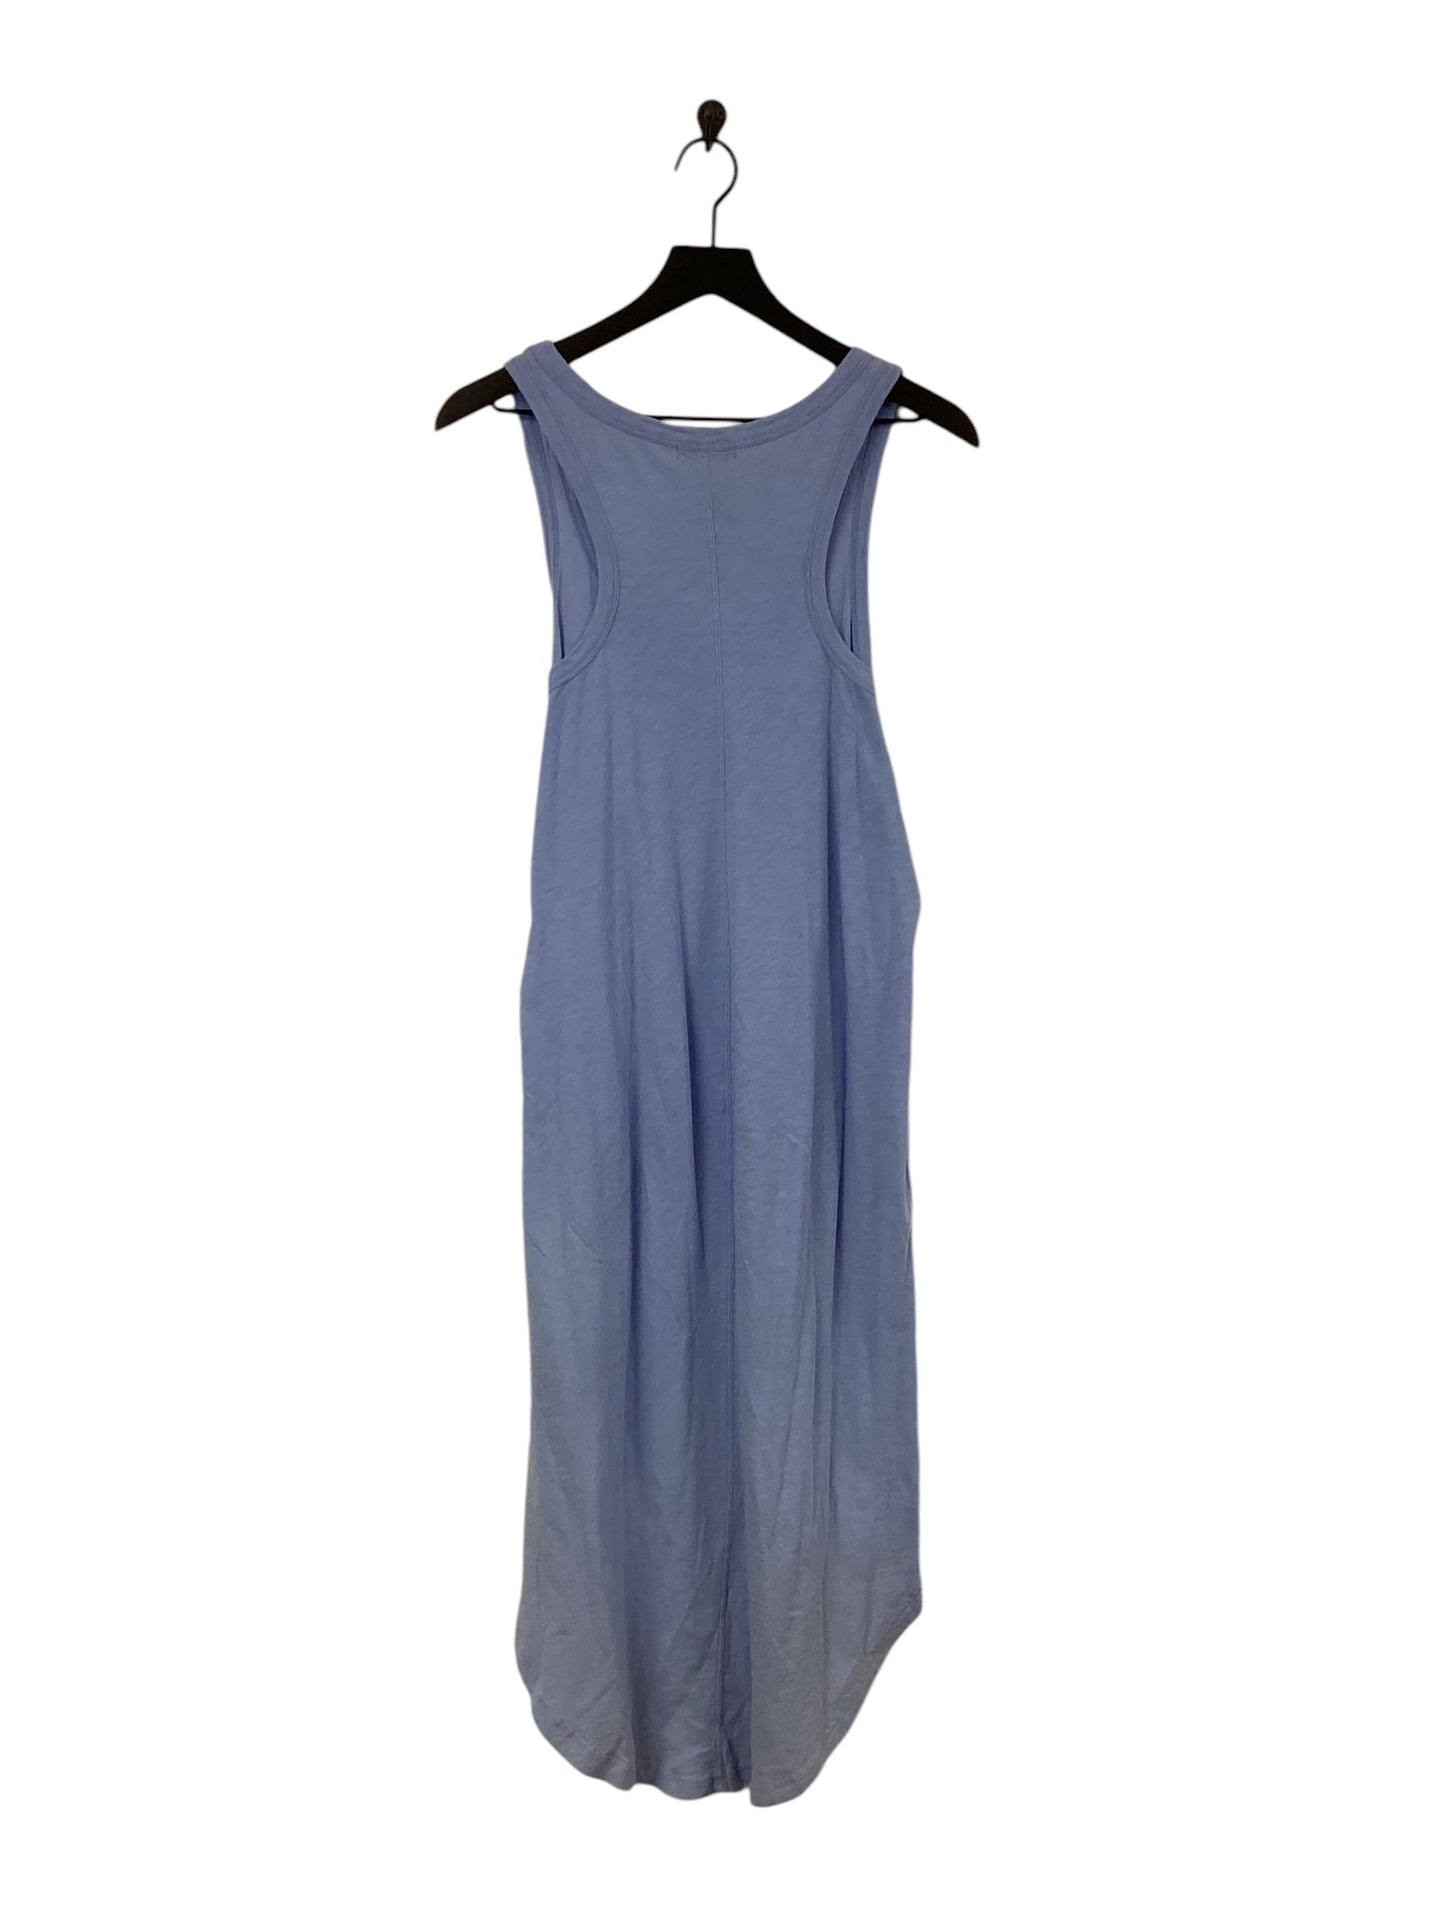 Dress Casual Maxi By Z Supply  Size: M